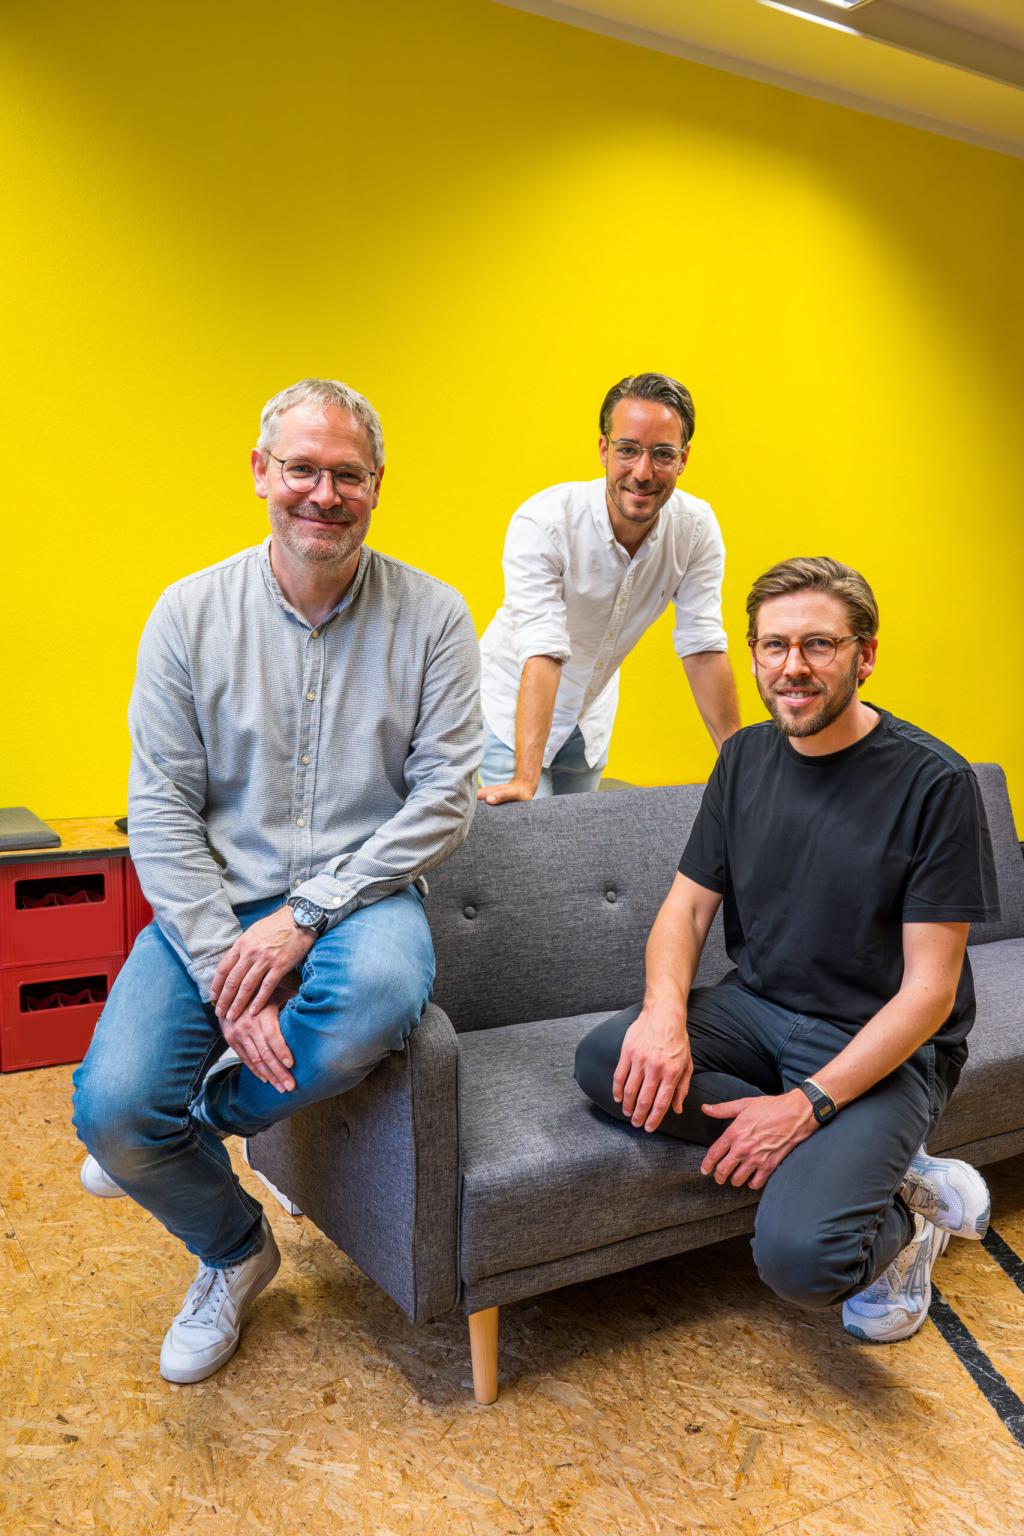 Mätch VC is the new venture capital fund from Baden-Württemberg